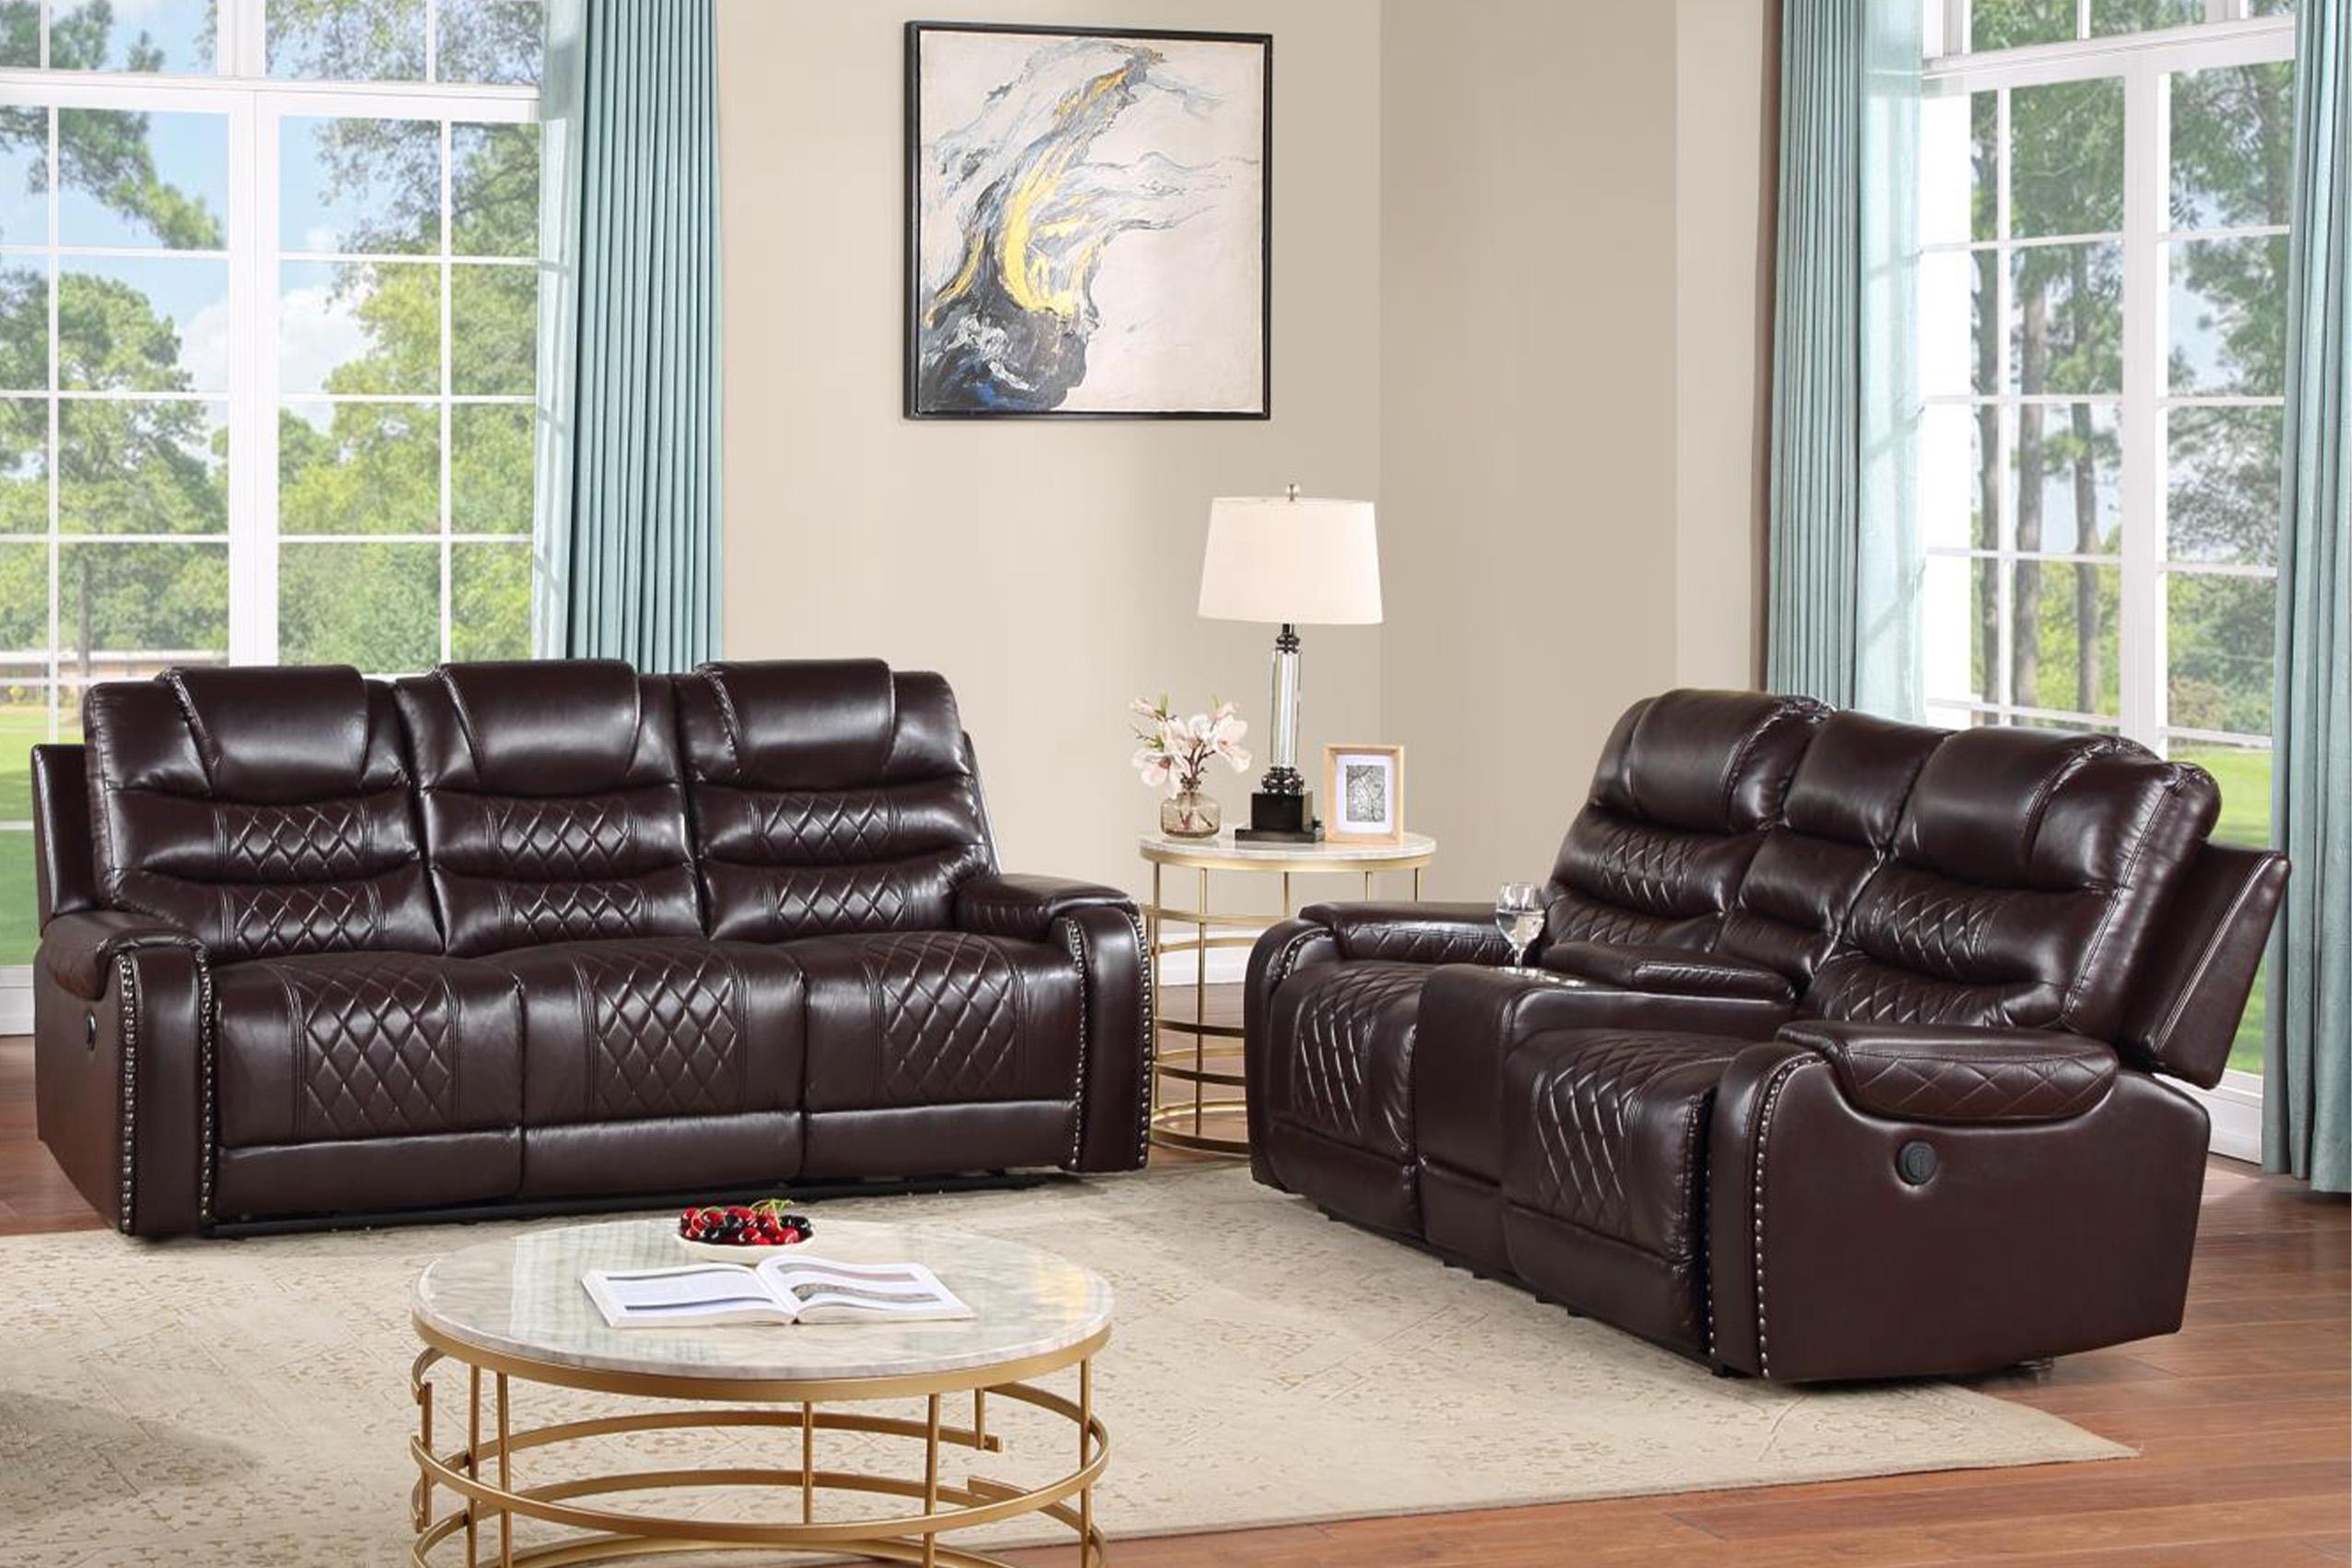 Contemporary, Modern Recliner Sofa Set TENNESSEE-BR TENNESSEE-BR-S-L in Espresso Eco Leather